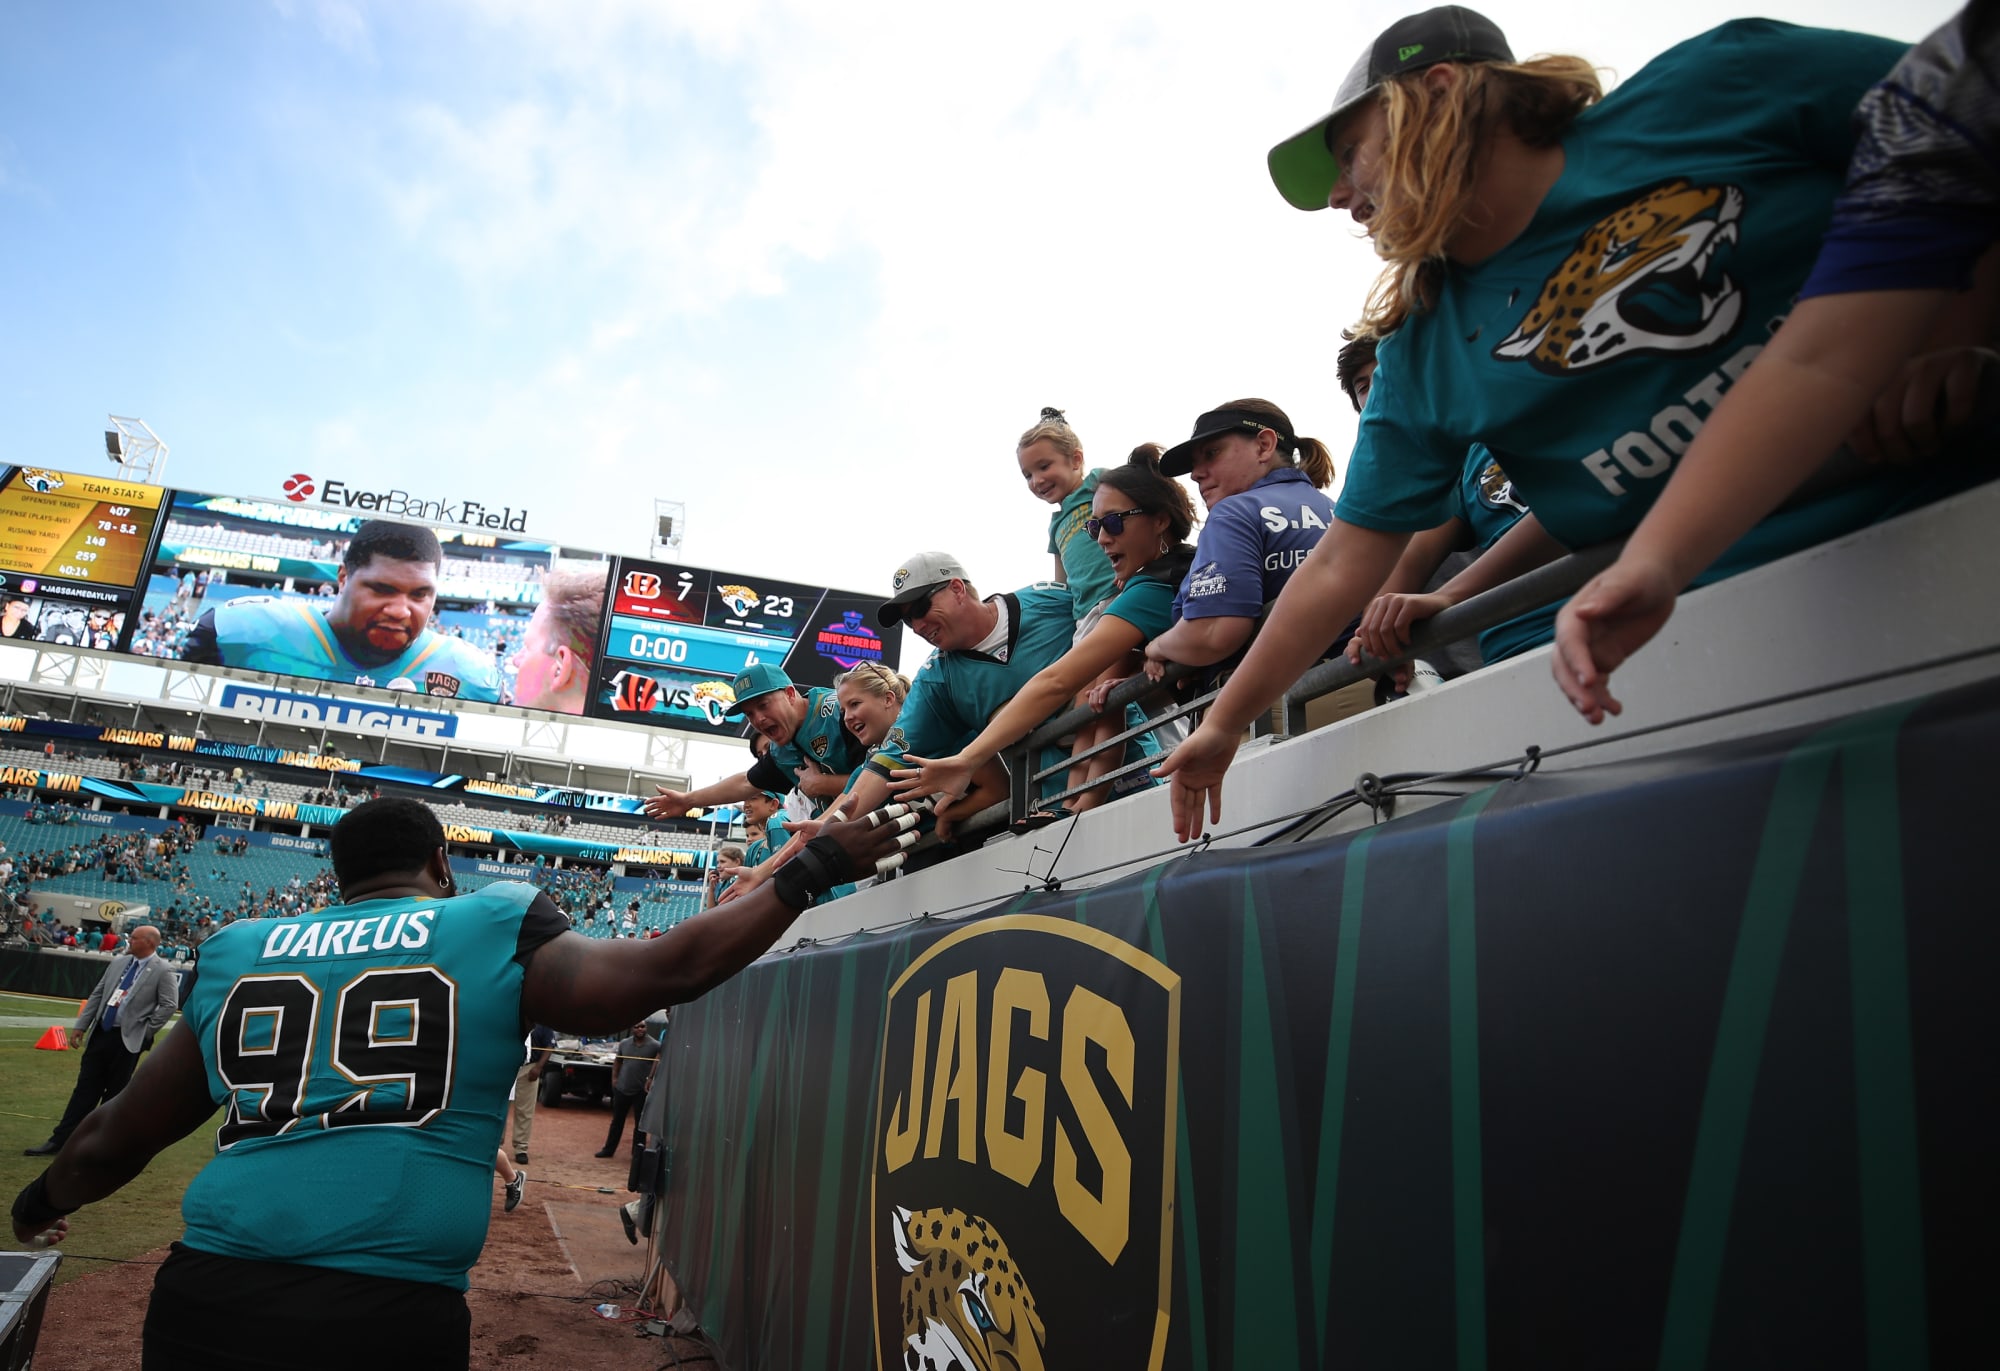 A look at the rest of the Jacksonville Jaguars schedule